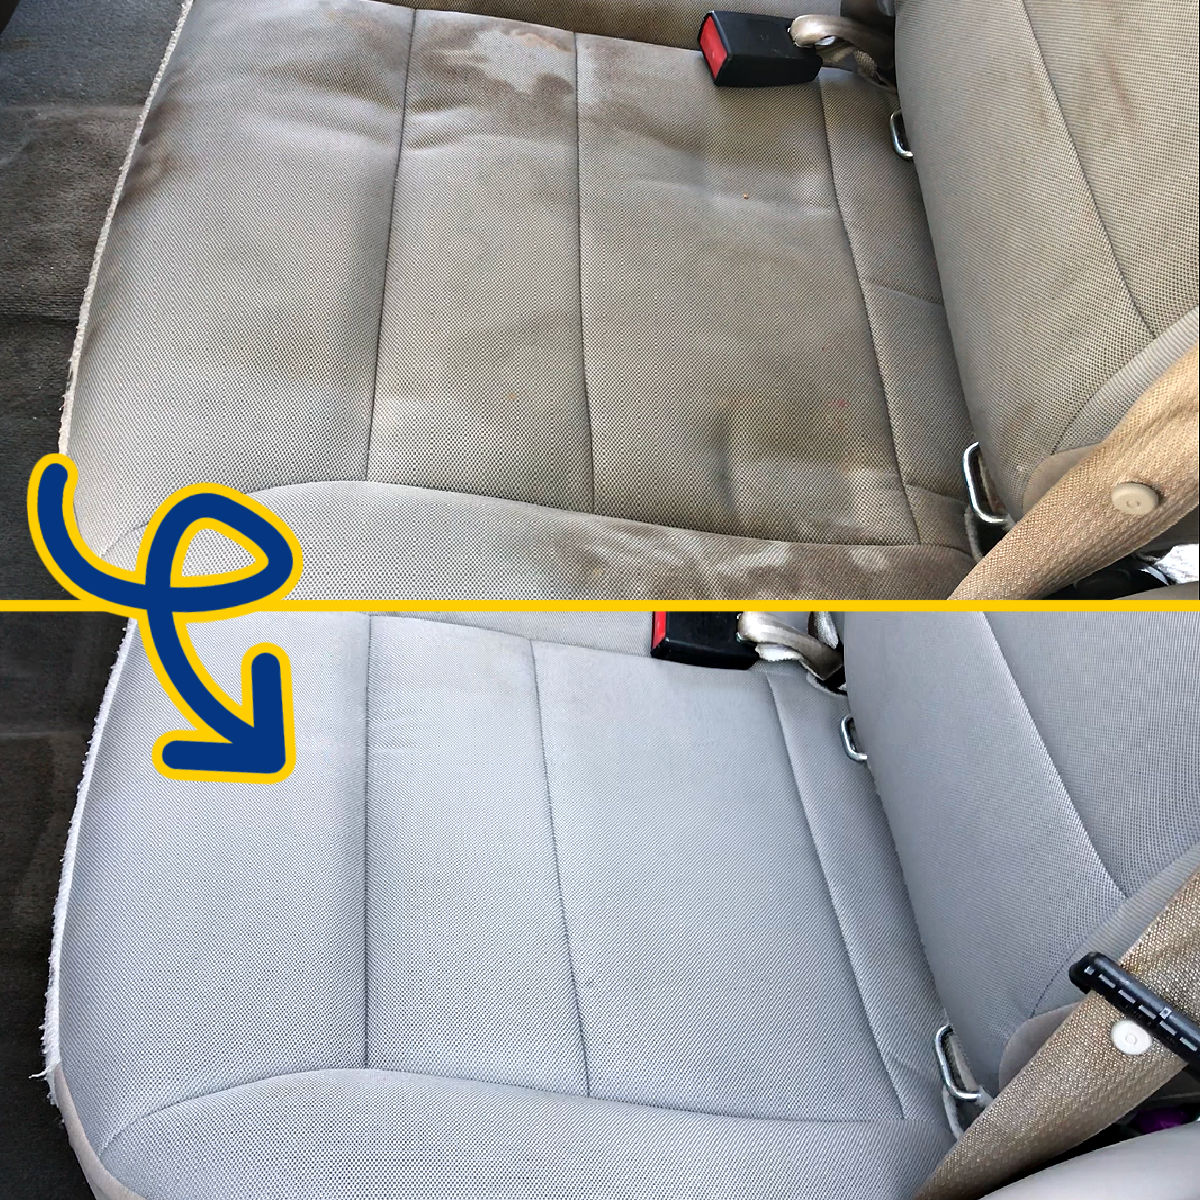 5 Types of Car Upholstery and How to Clean Them [VIDEO]